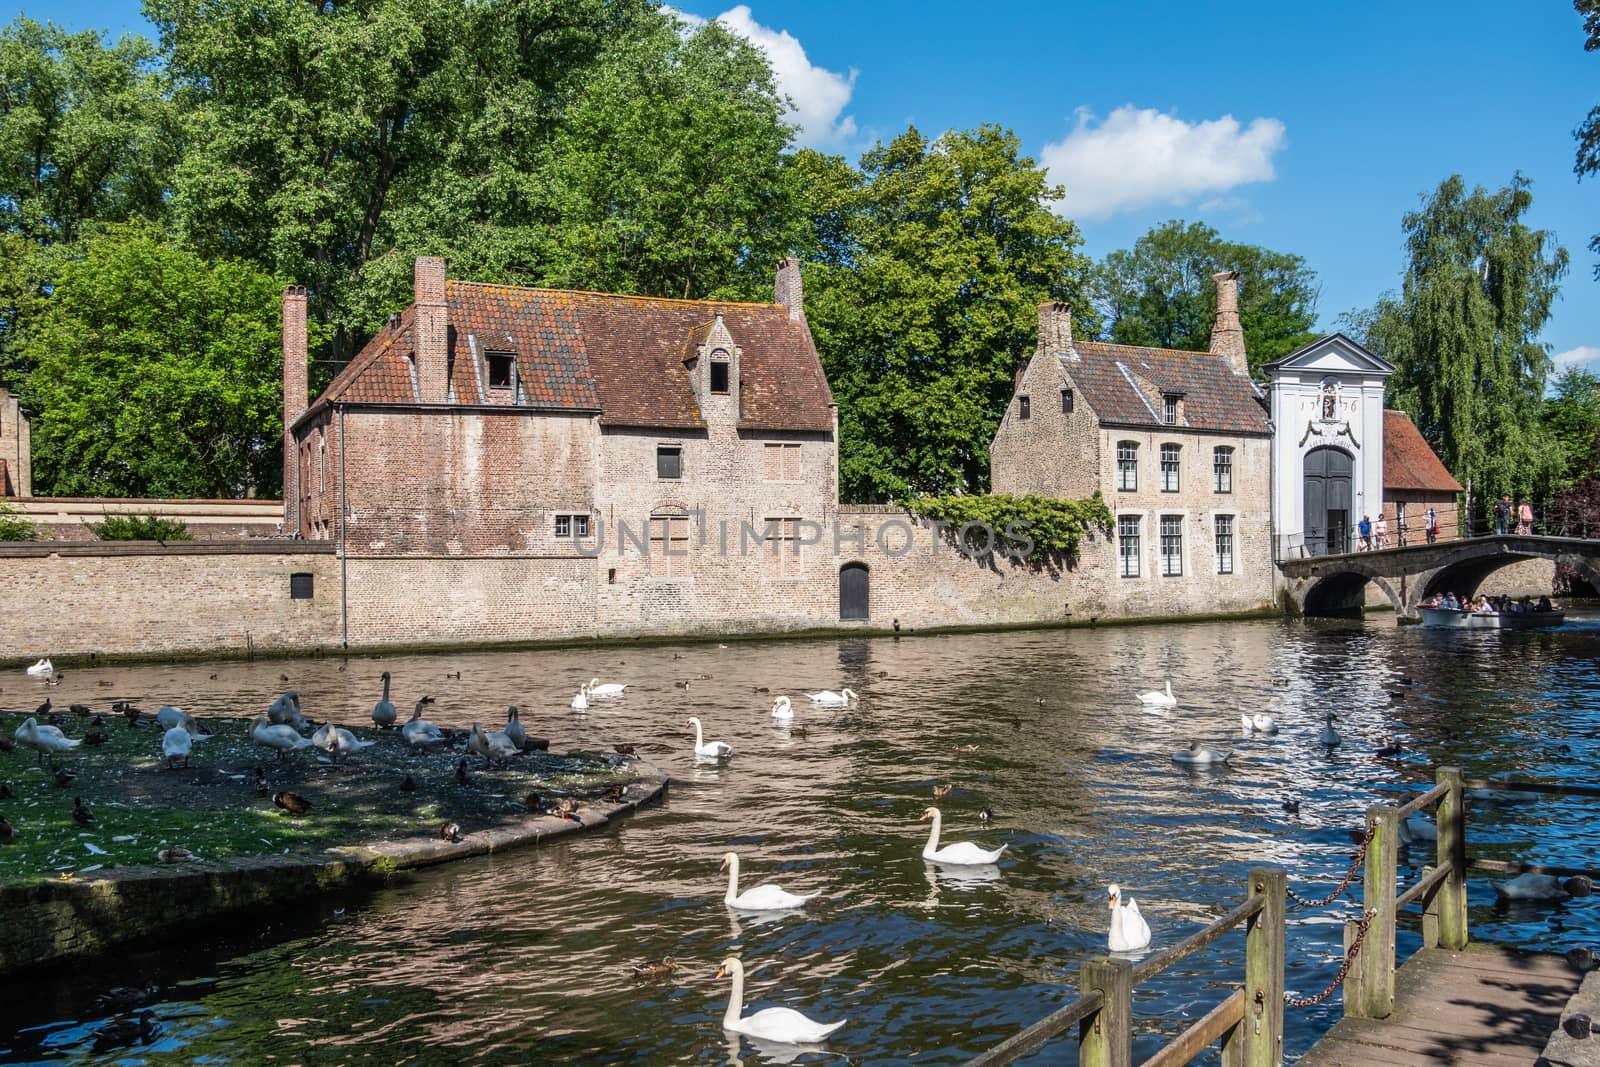 Bruges, Flanders, Belgium -  June 17, 2019: Brown brick stone outer facade and wall of Beguinage. Dark canal with white swans and boat in front. Blue sky and green foliage.